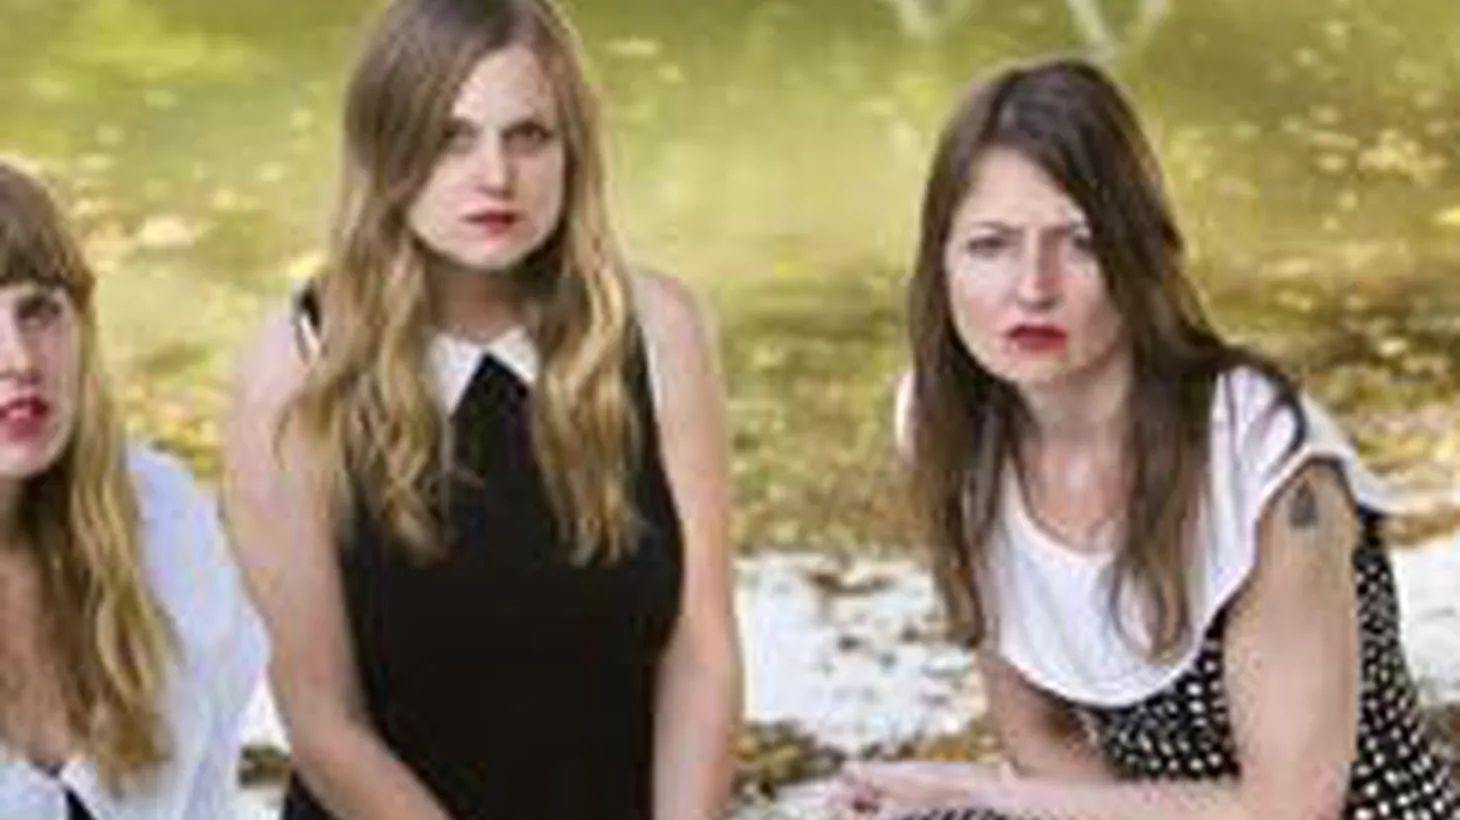 Los Angeles based trio, The Chapin Sisters, share their haunting harmonies as they perform on Morning Becomes Eclectic at 11:15am.